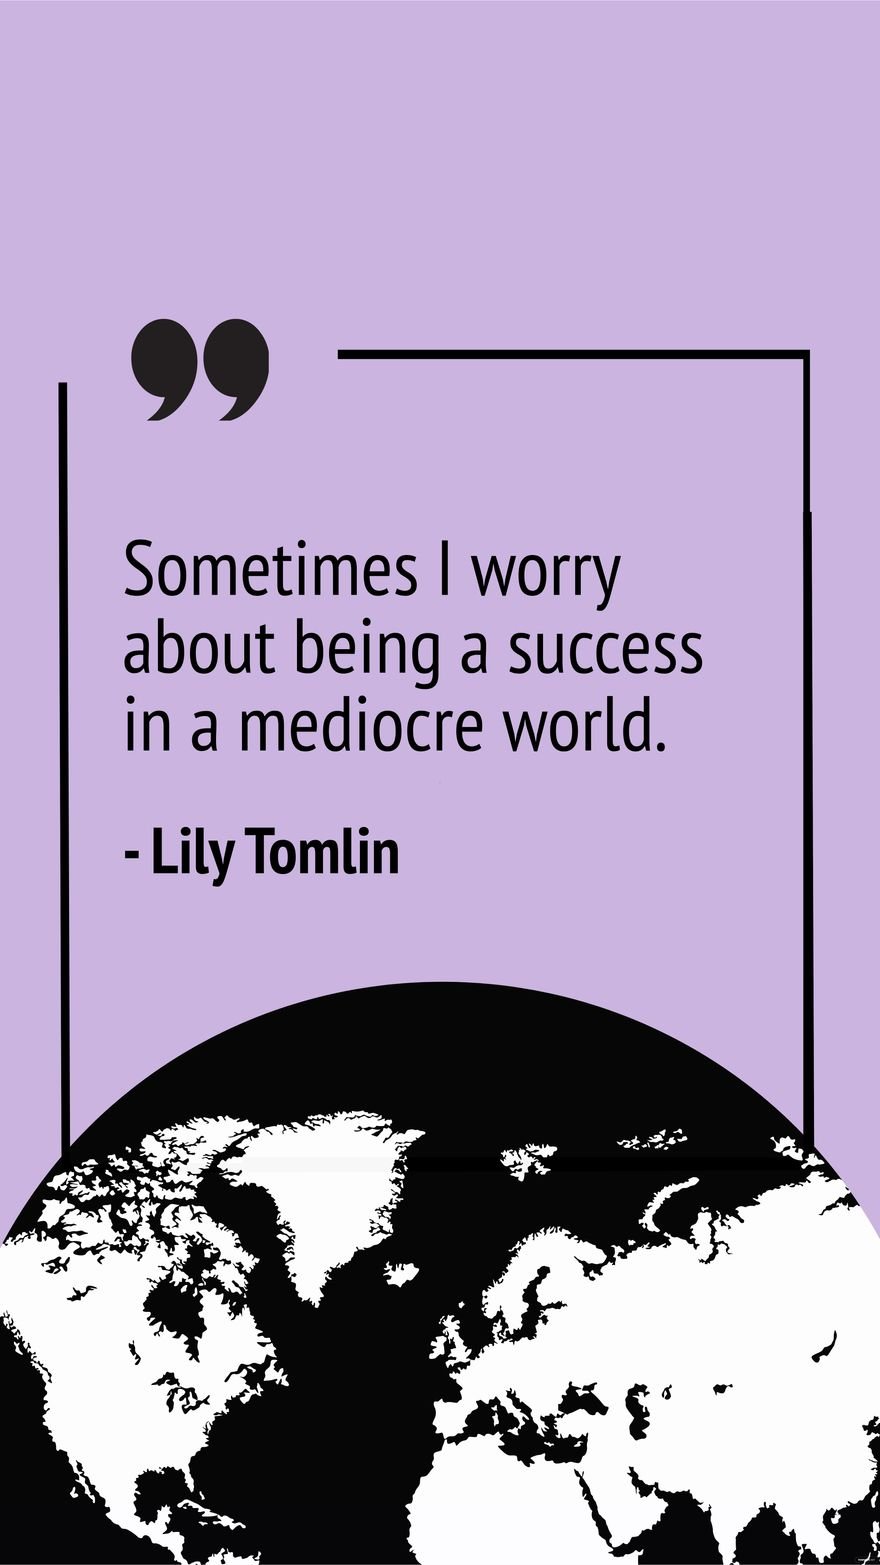 Free Lily Tomlin - Sometimes I worry about being a success in a mediocre world.